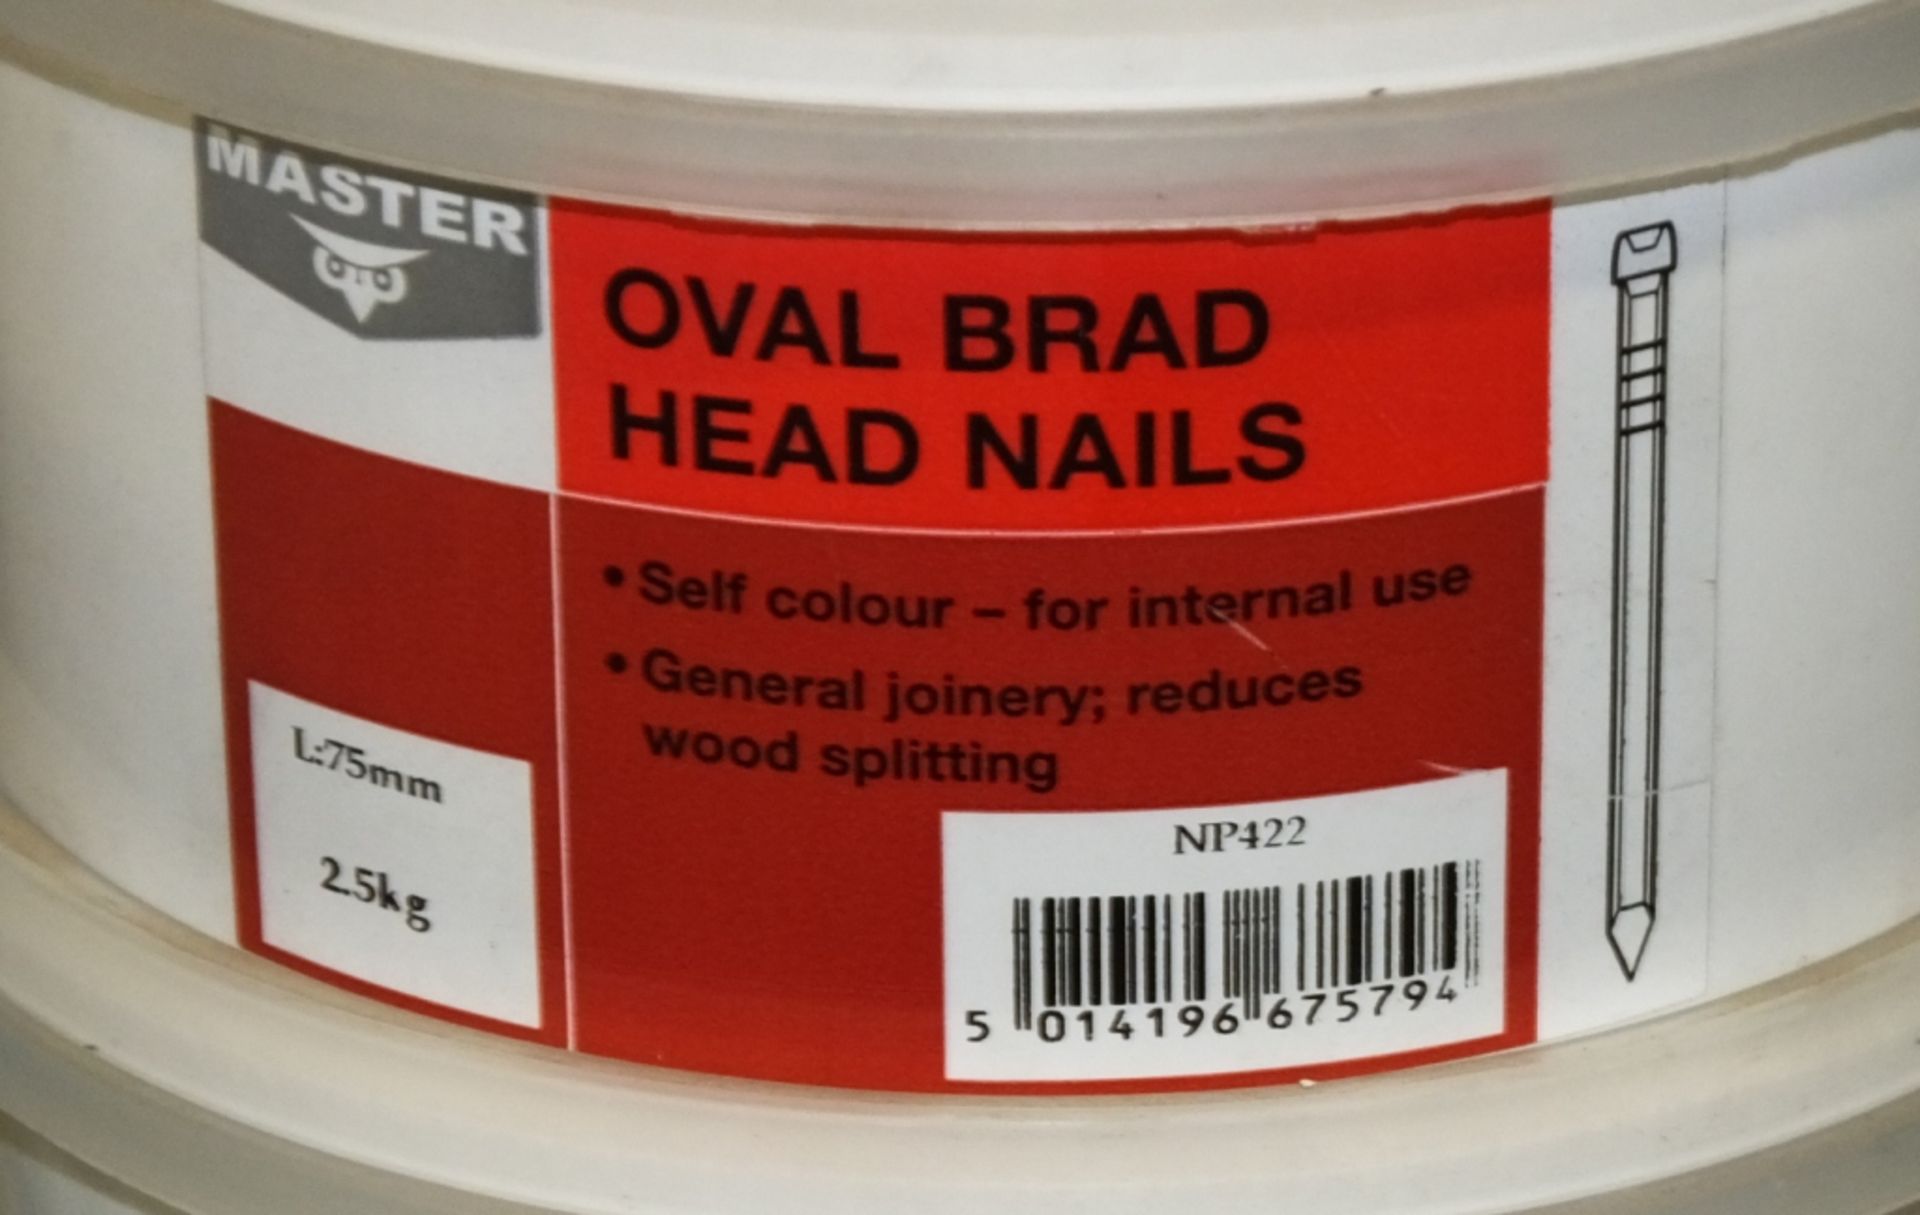 2x 2.5kg Oval Brad Head Nails - Image 2 of 2